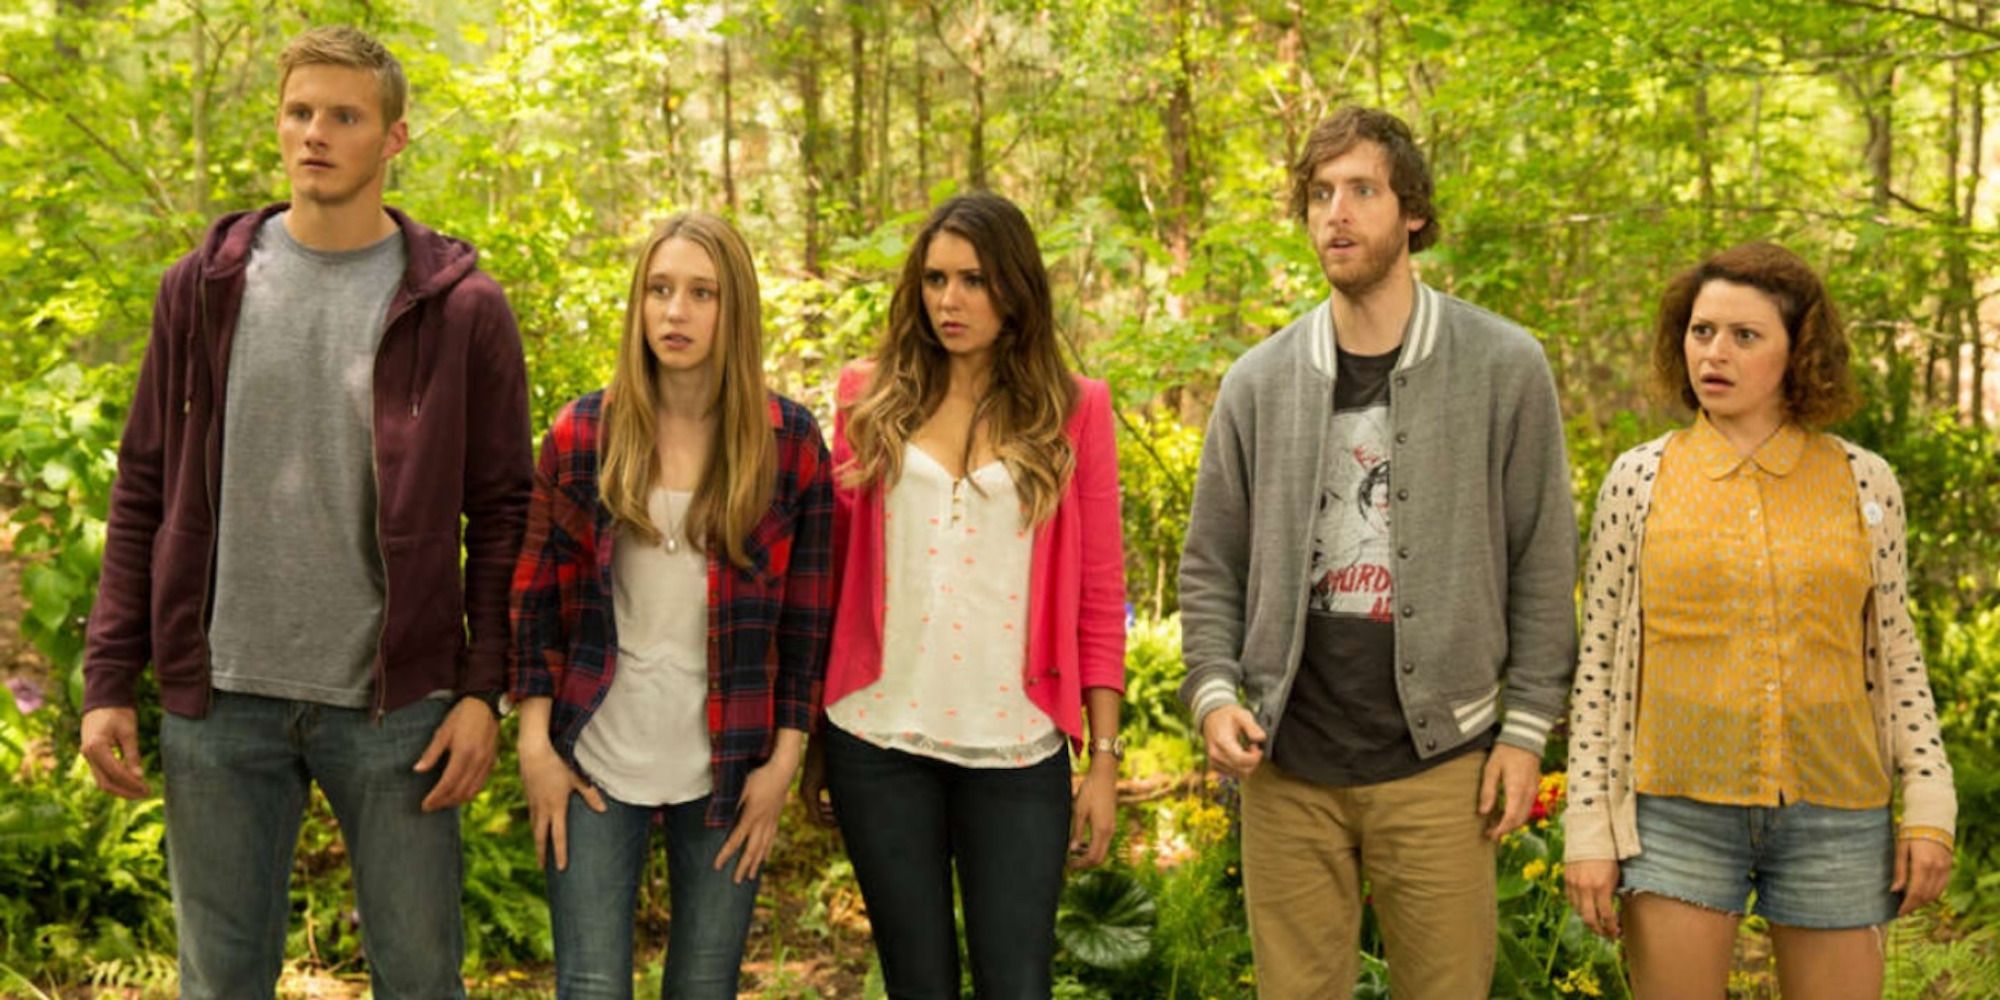 Characters in a scene from The Final Girls